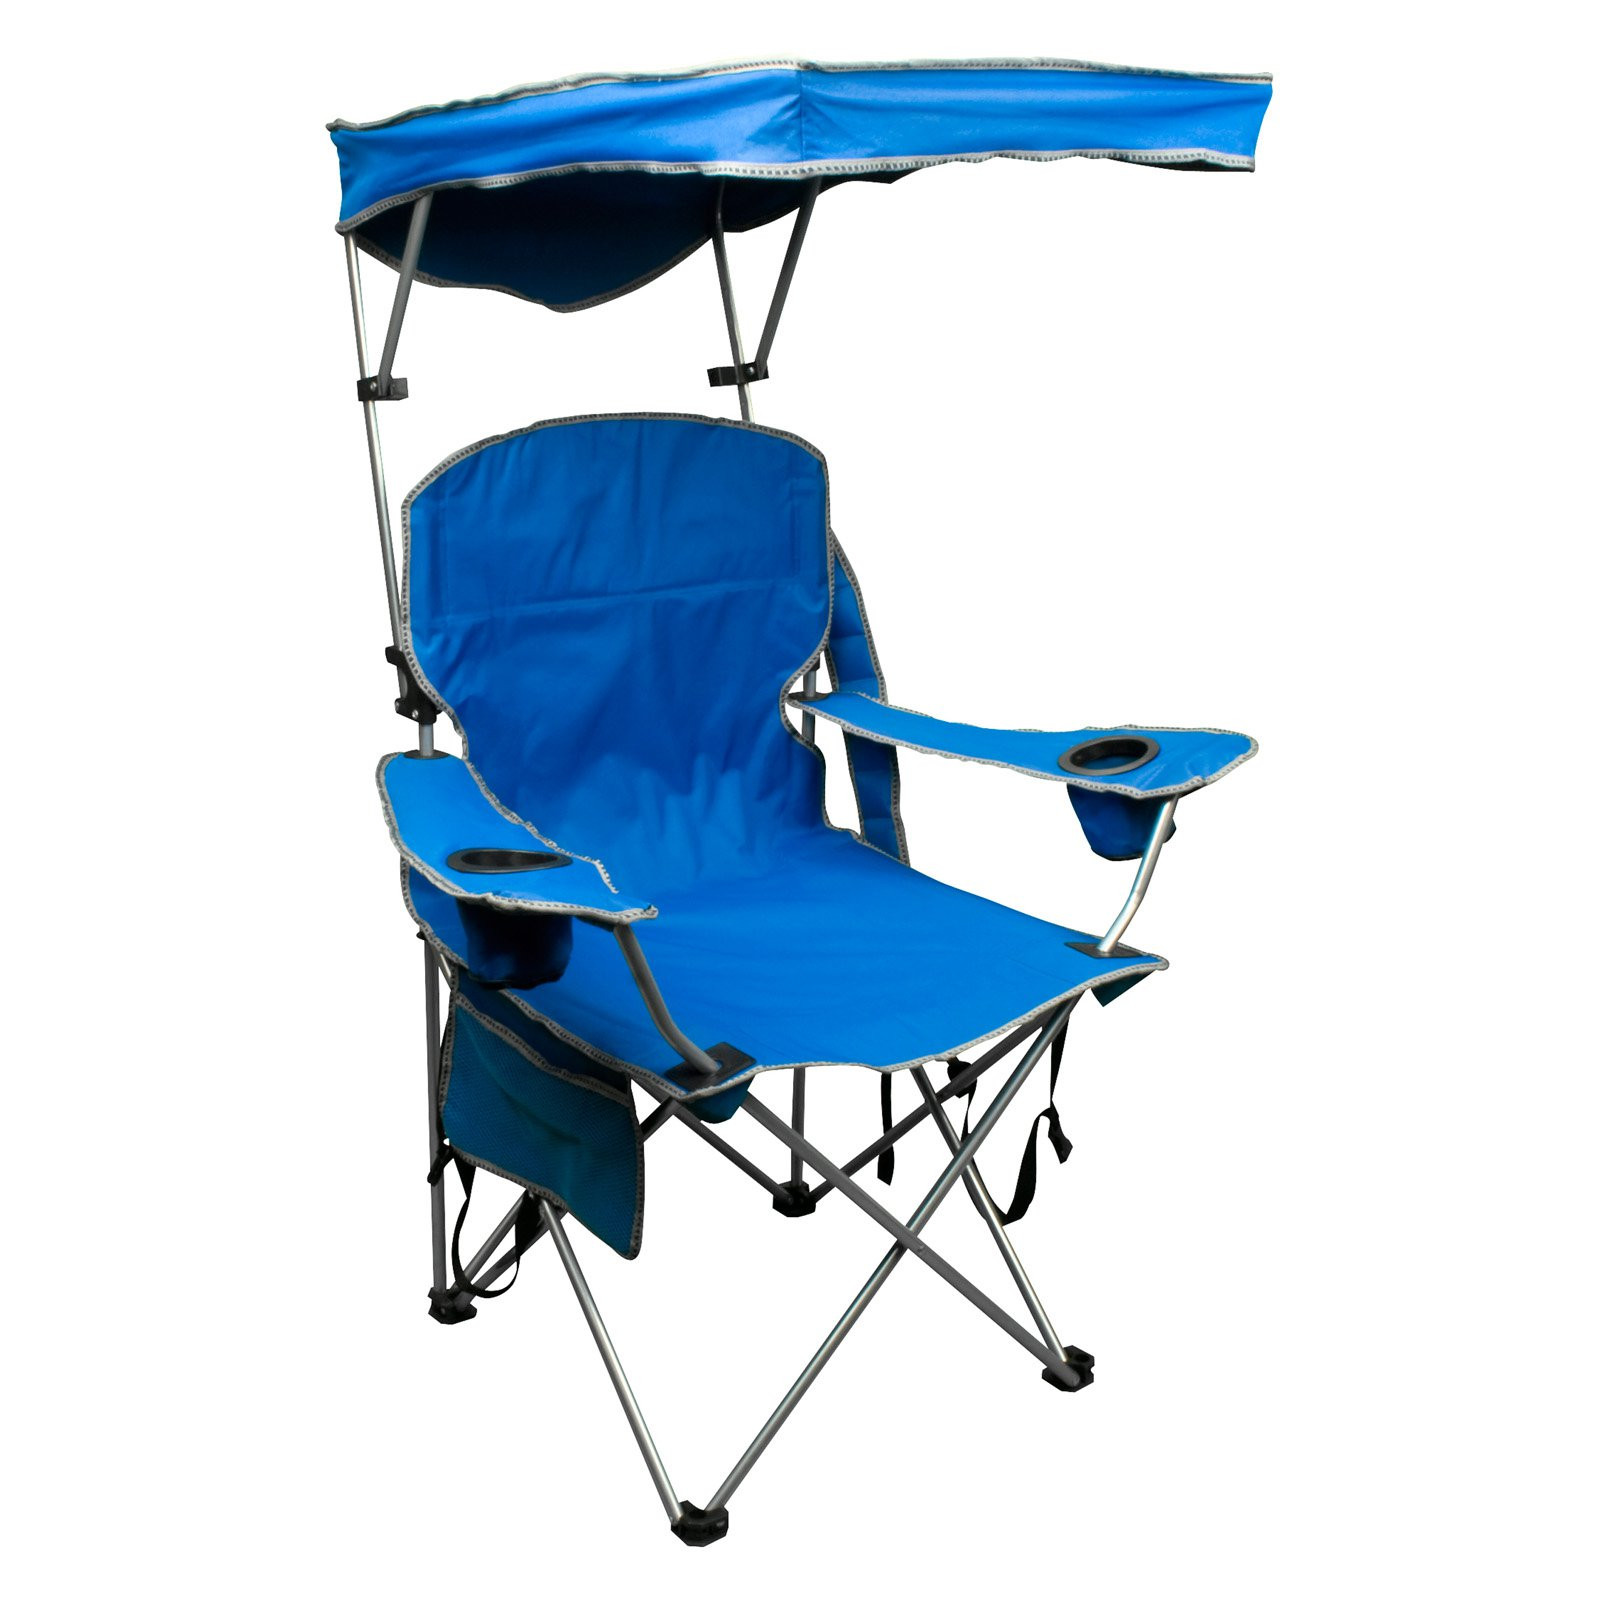 Kids Canopy Chair
 Quick Shade Folding Camp Chair with Canopy Lawn Chairs